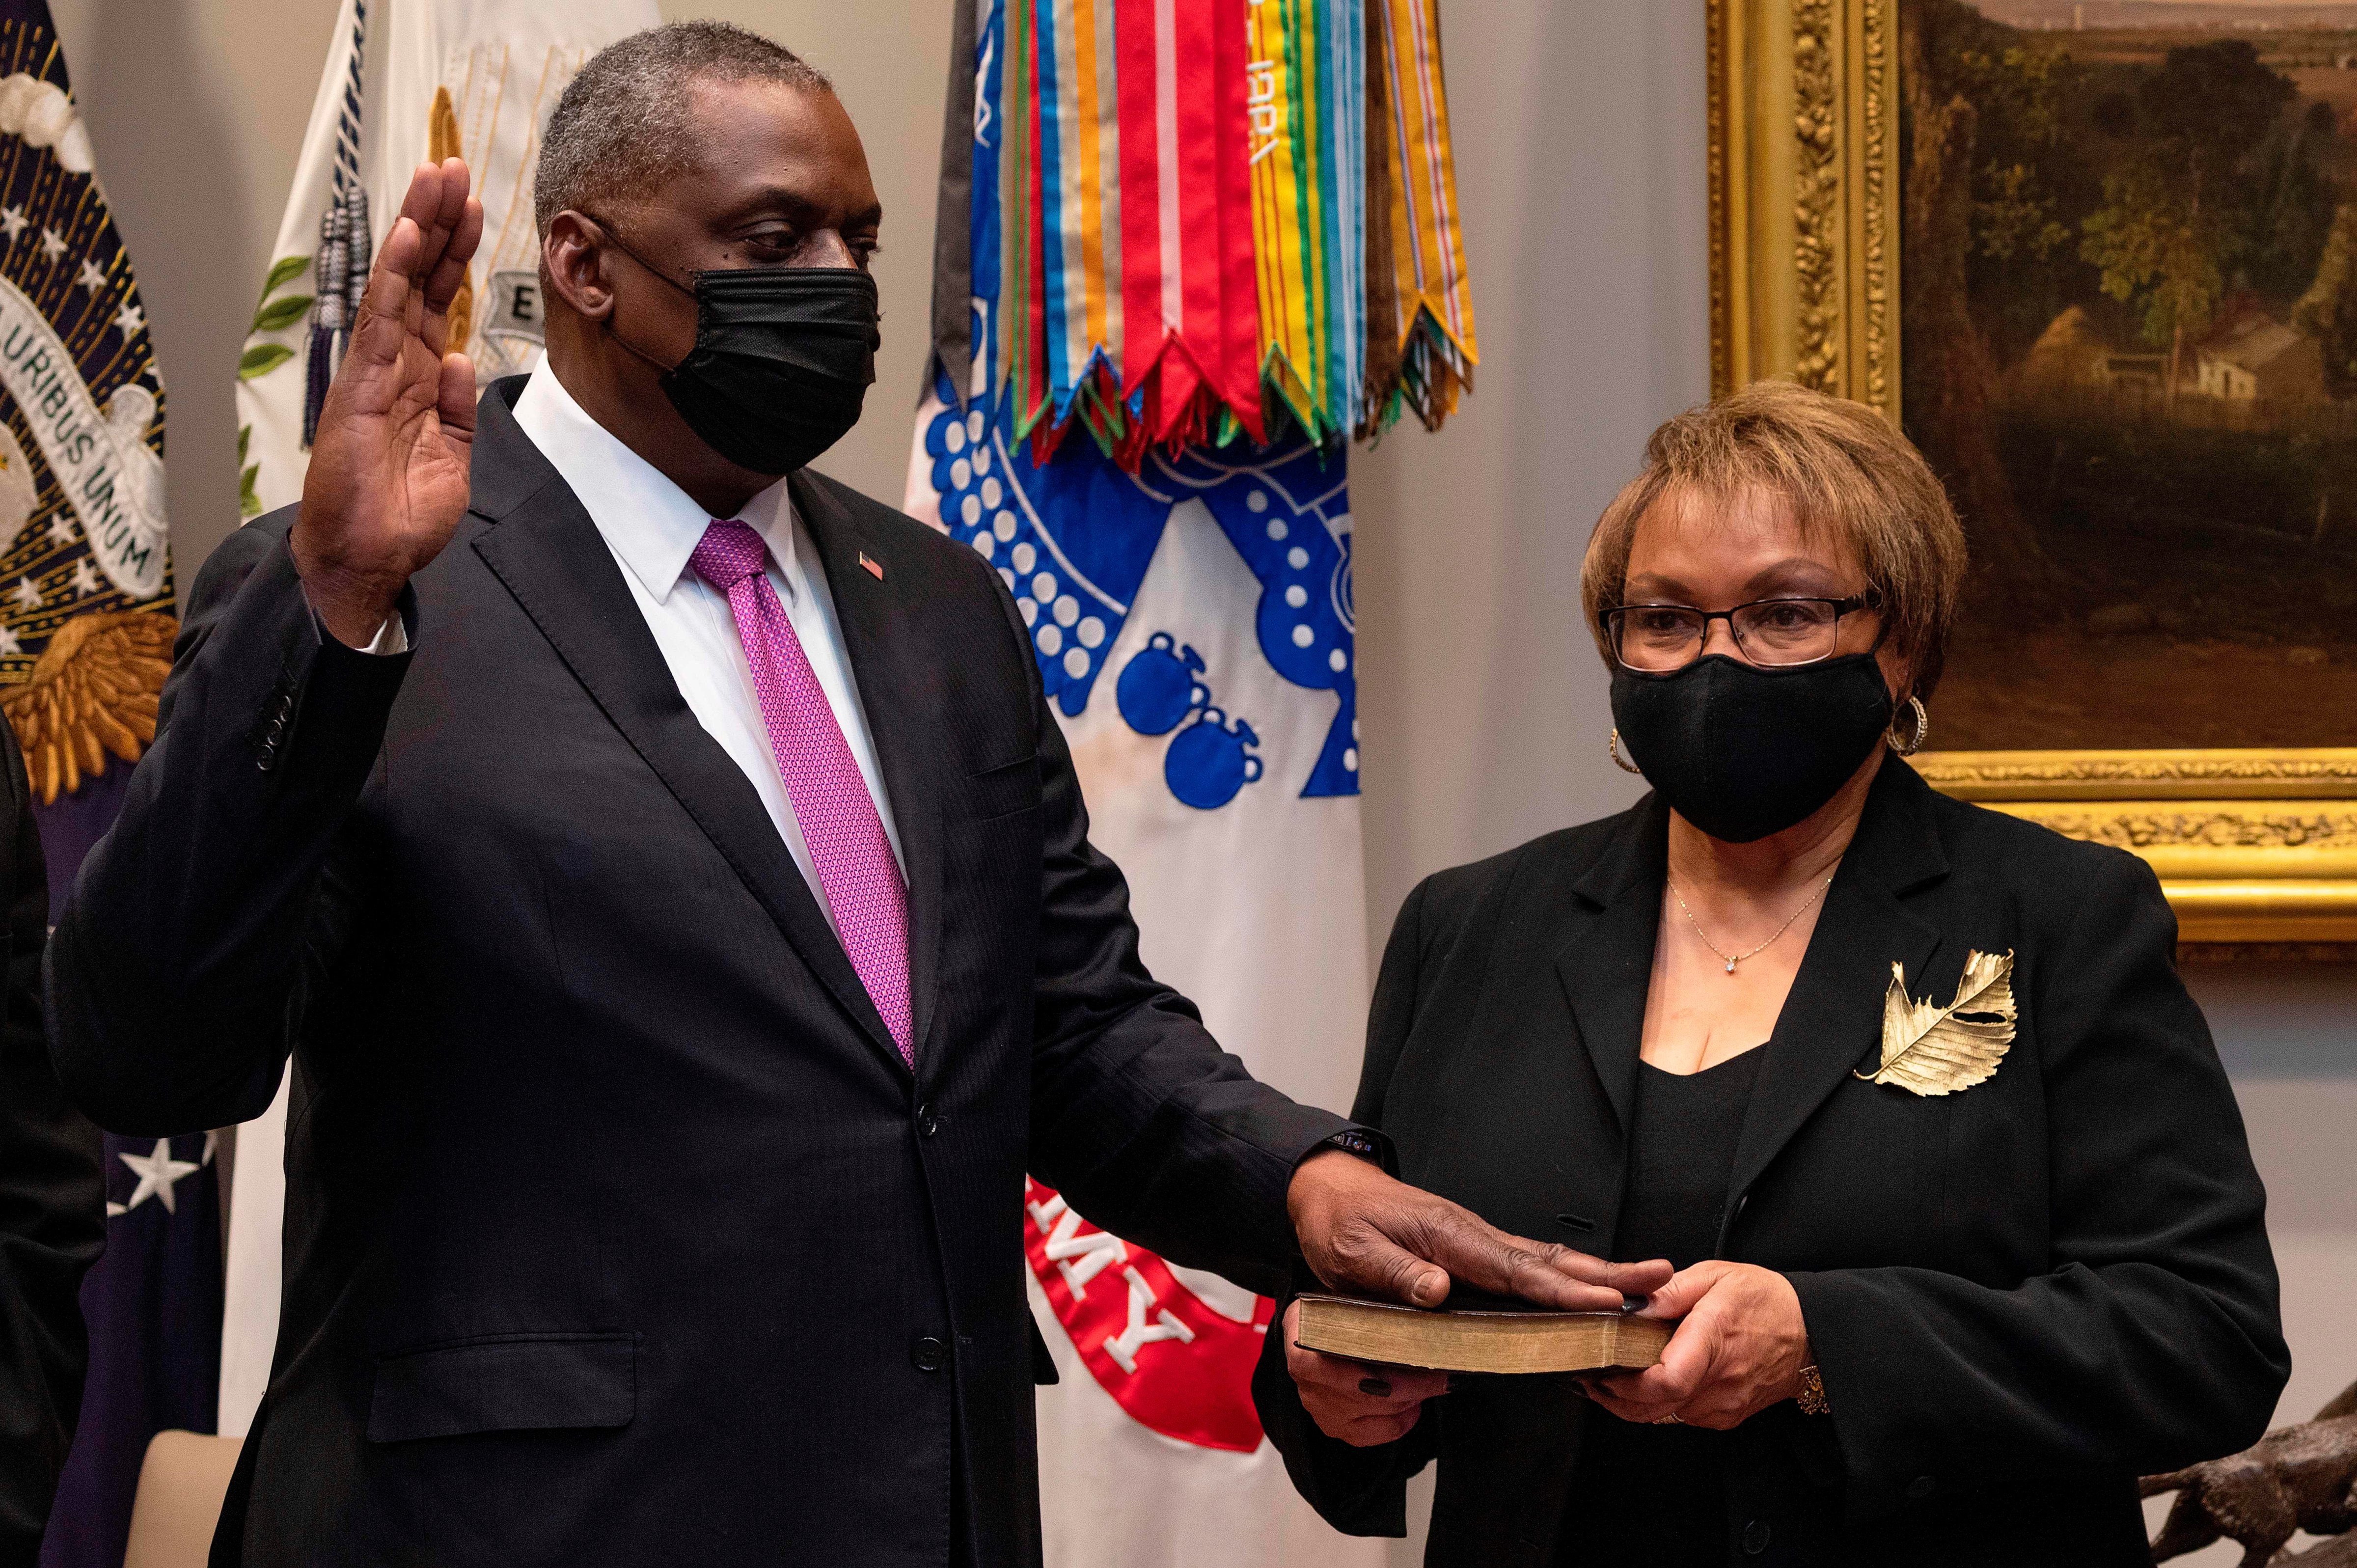 Lloyd Austin, a retired U.S. Army four-star general, is sworn in as Secretary of Defense as his wife, Charlene Austin, holds the Bible in Washington D.C. on Jan. 25, 2021. (Jim Watson—AFP/Getty Images)